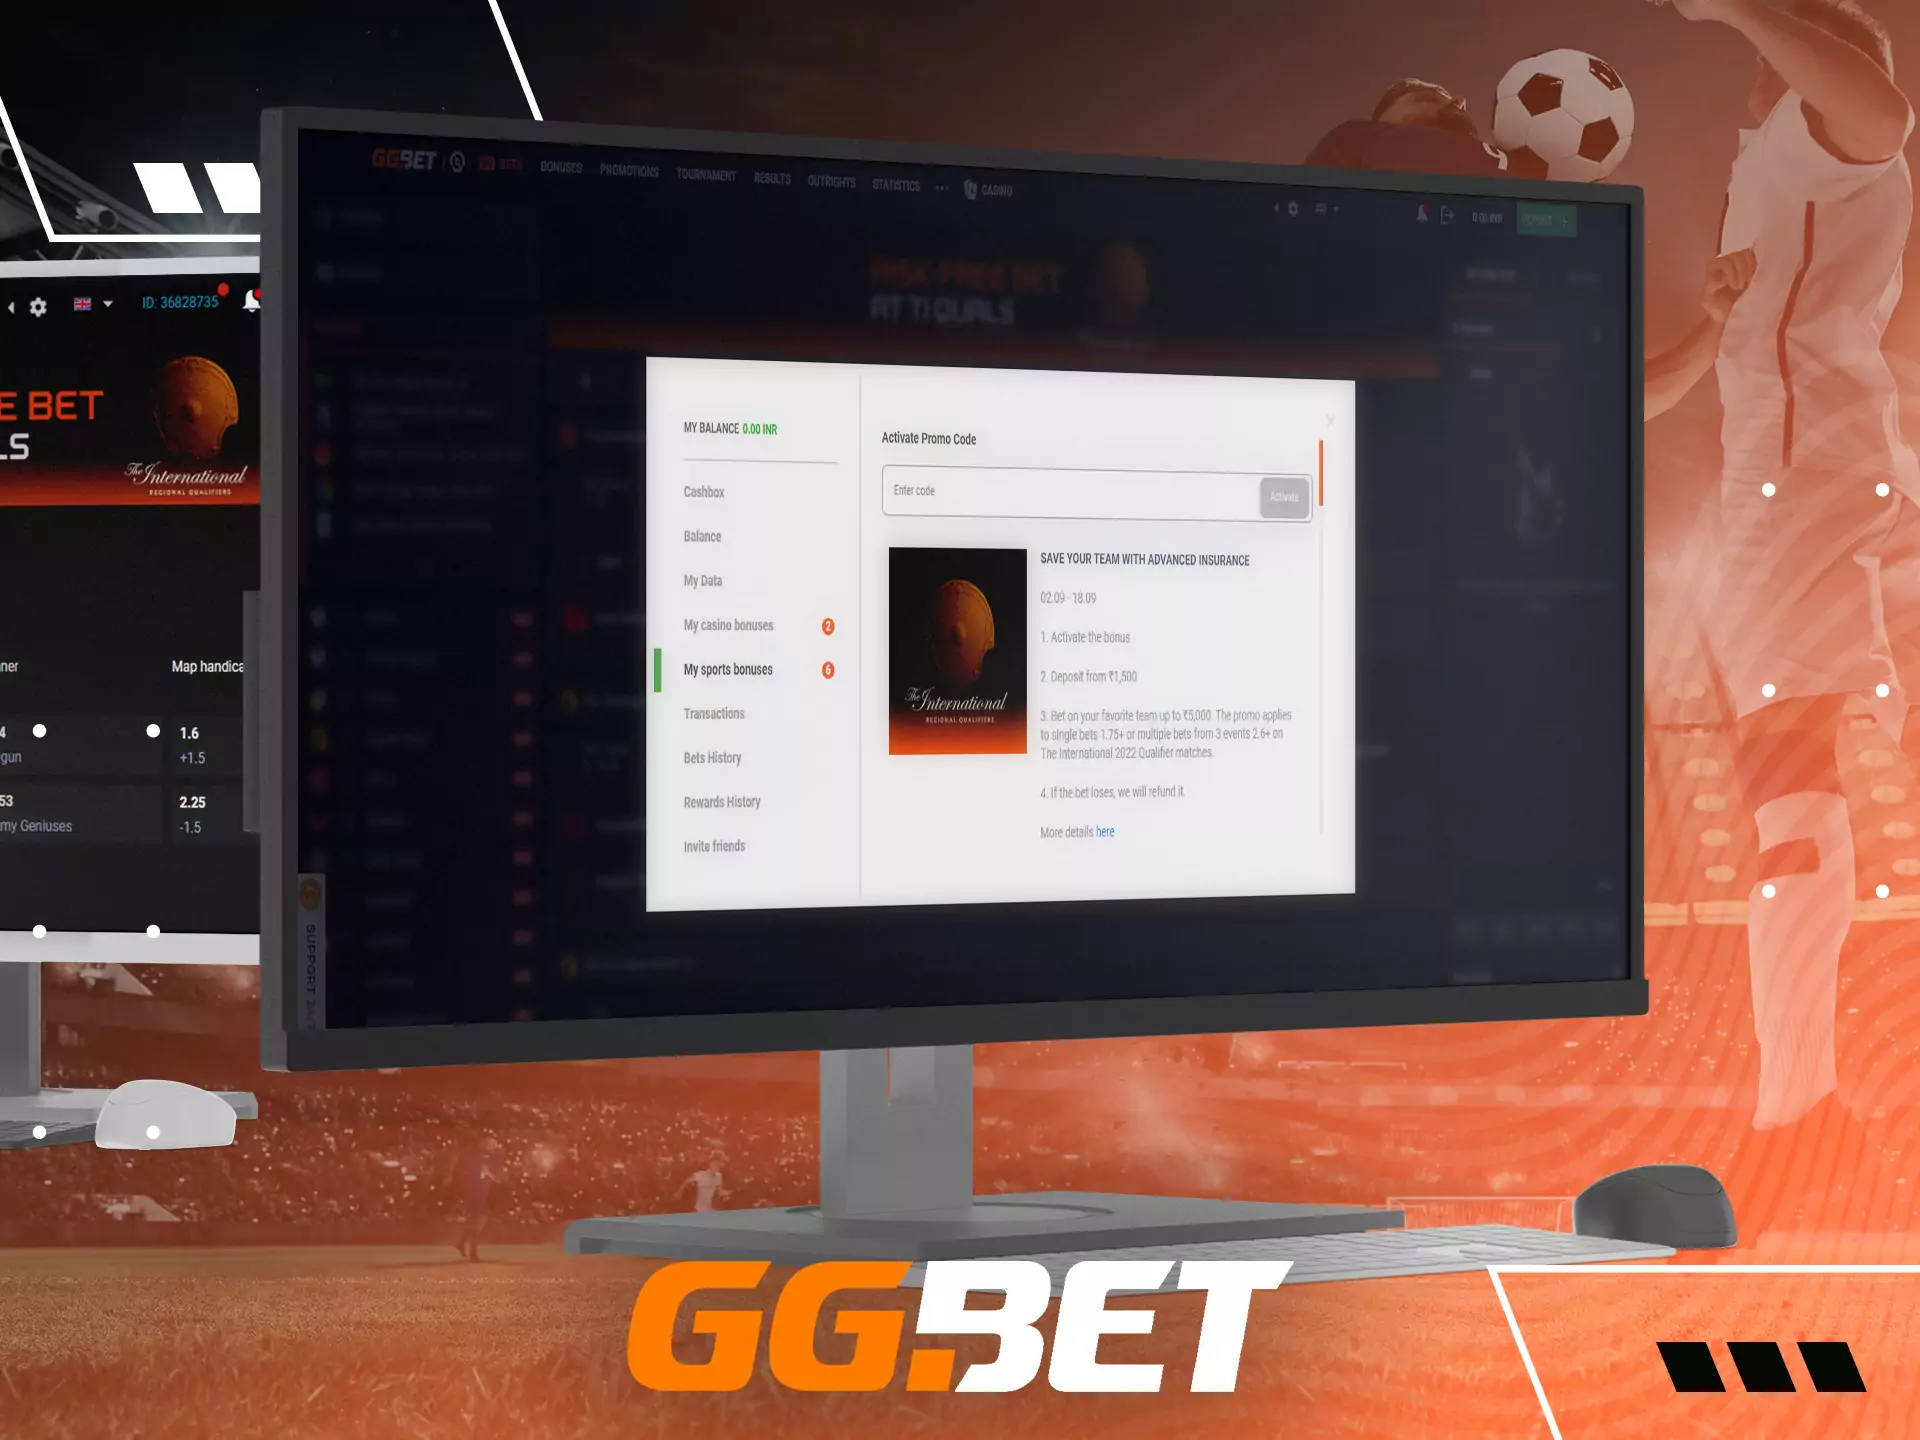 In the GGBet personal profile, you find available promotions for bettors on sports events.